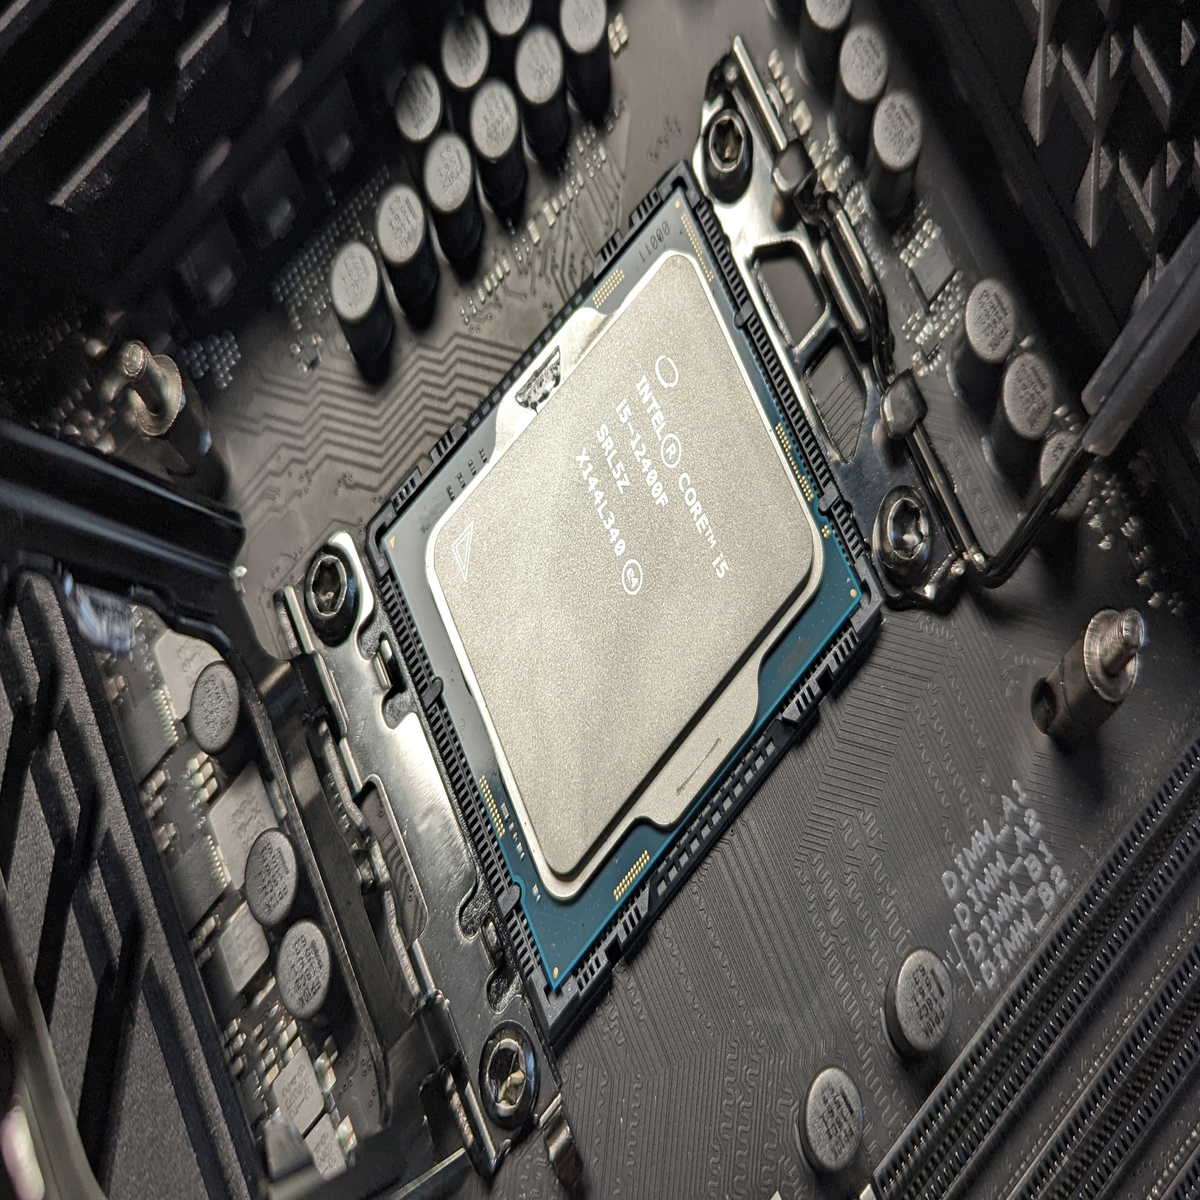 Intel 12th Gen CPUs Get Crazy Price Discounts: Core i7-12700KF For